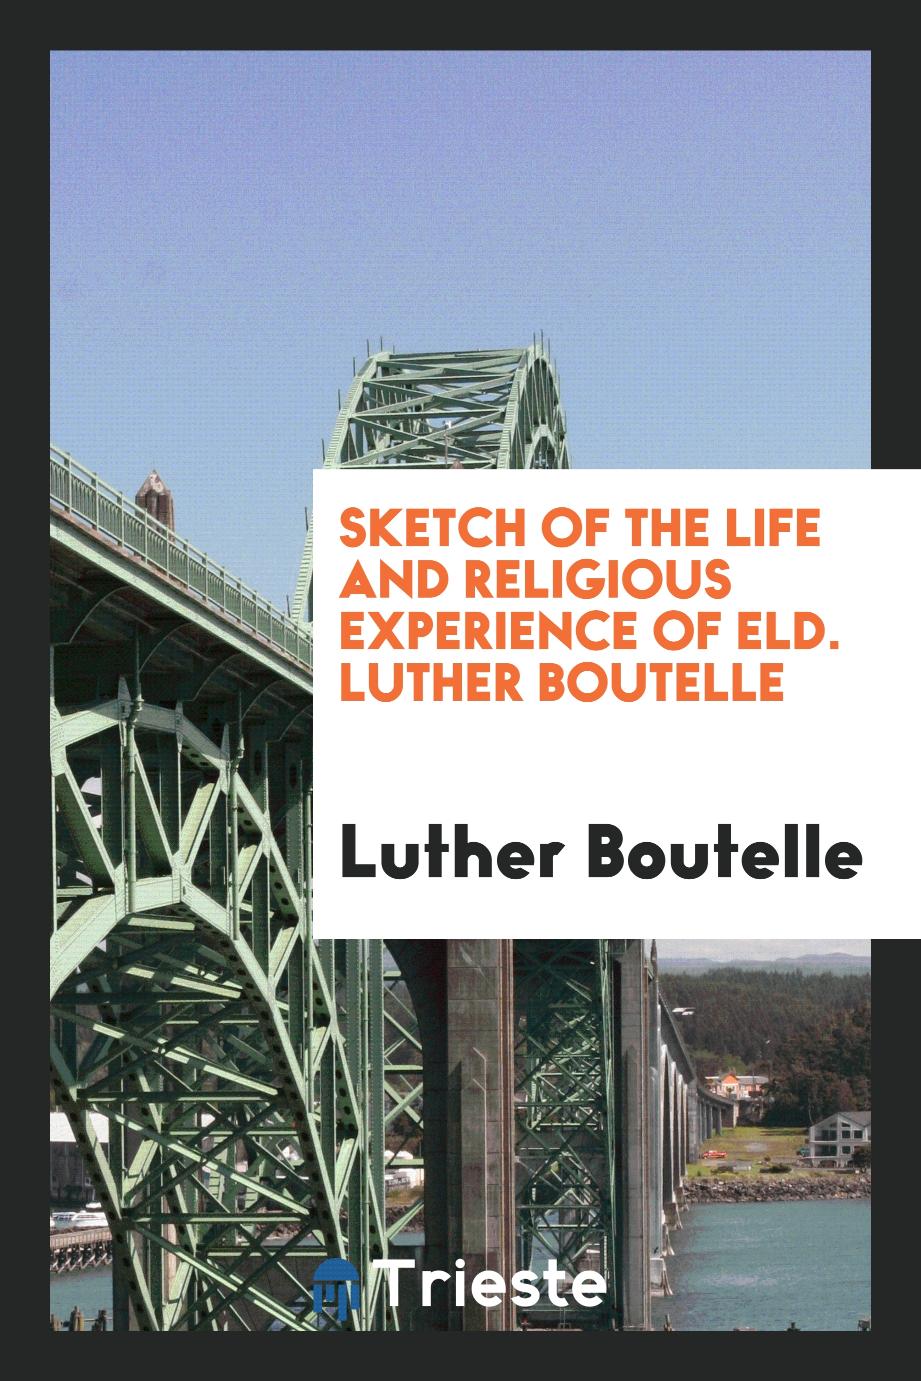 Sketch of the Life and Religious Experience of Eld. Luther Boutelle